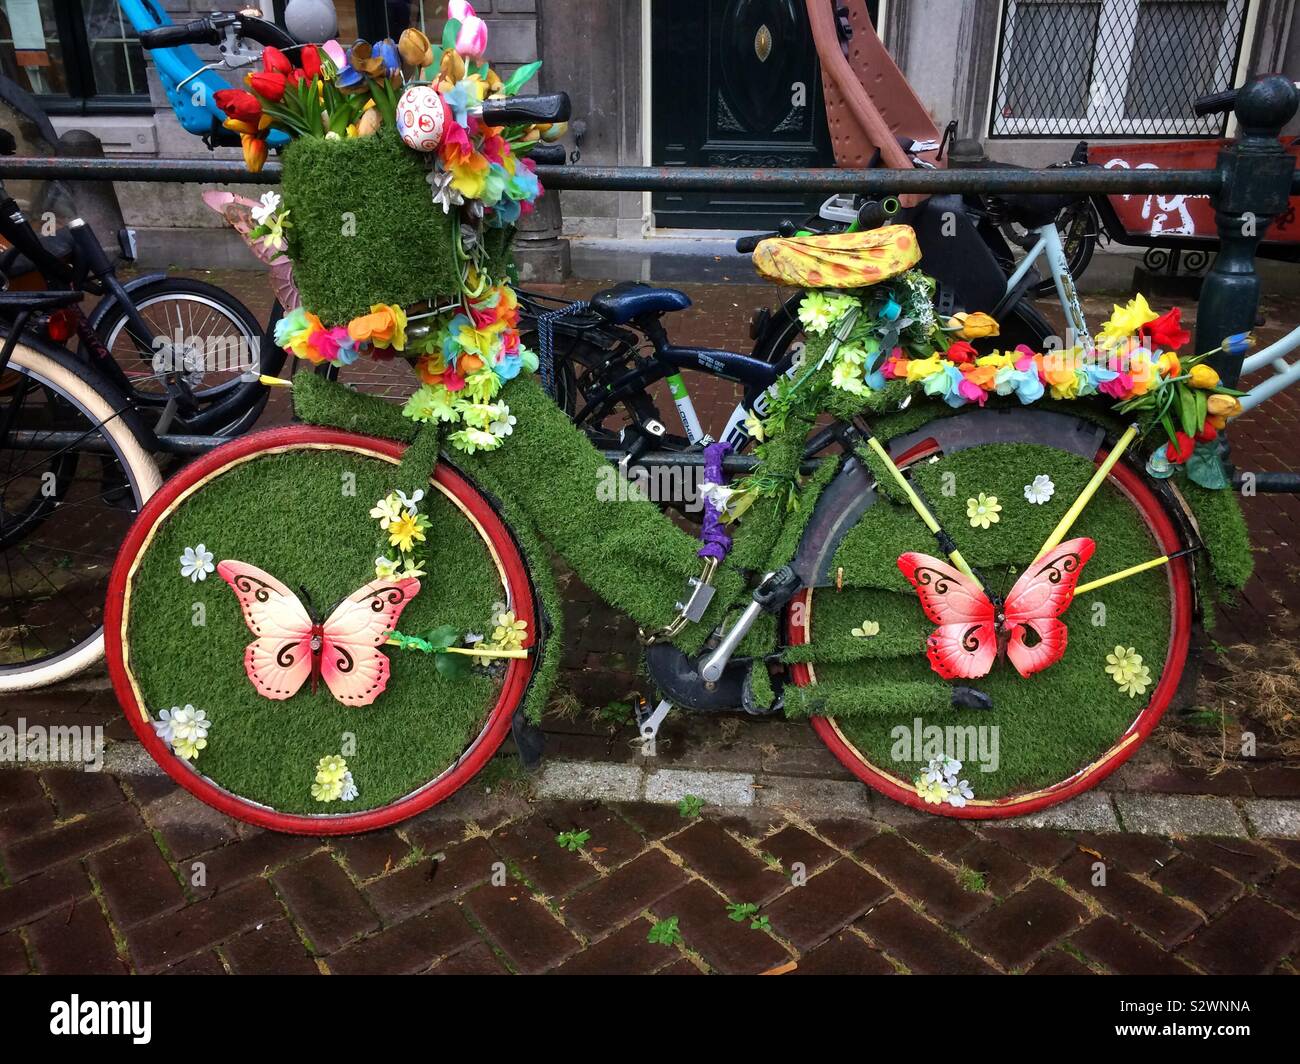 A beautifully decorated nature themed bicycle featuring fake grass, butterflies and flowers in Amsterdam, The Netherlands Stock Photo